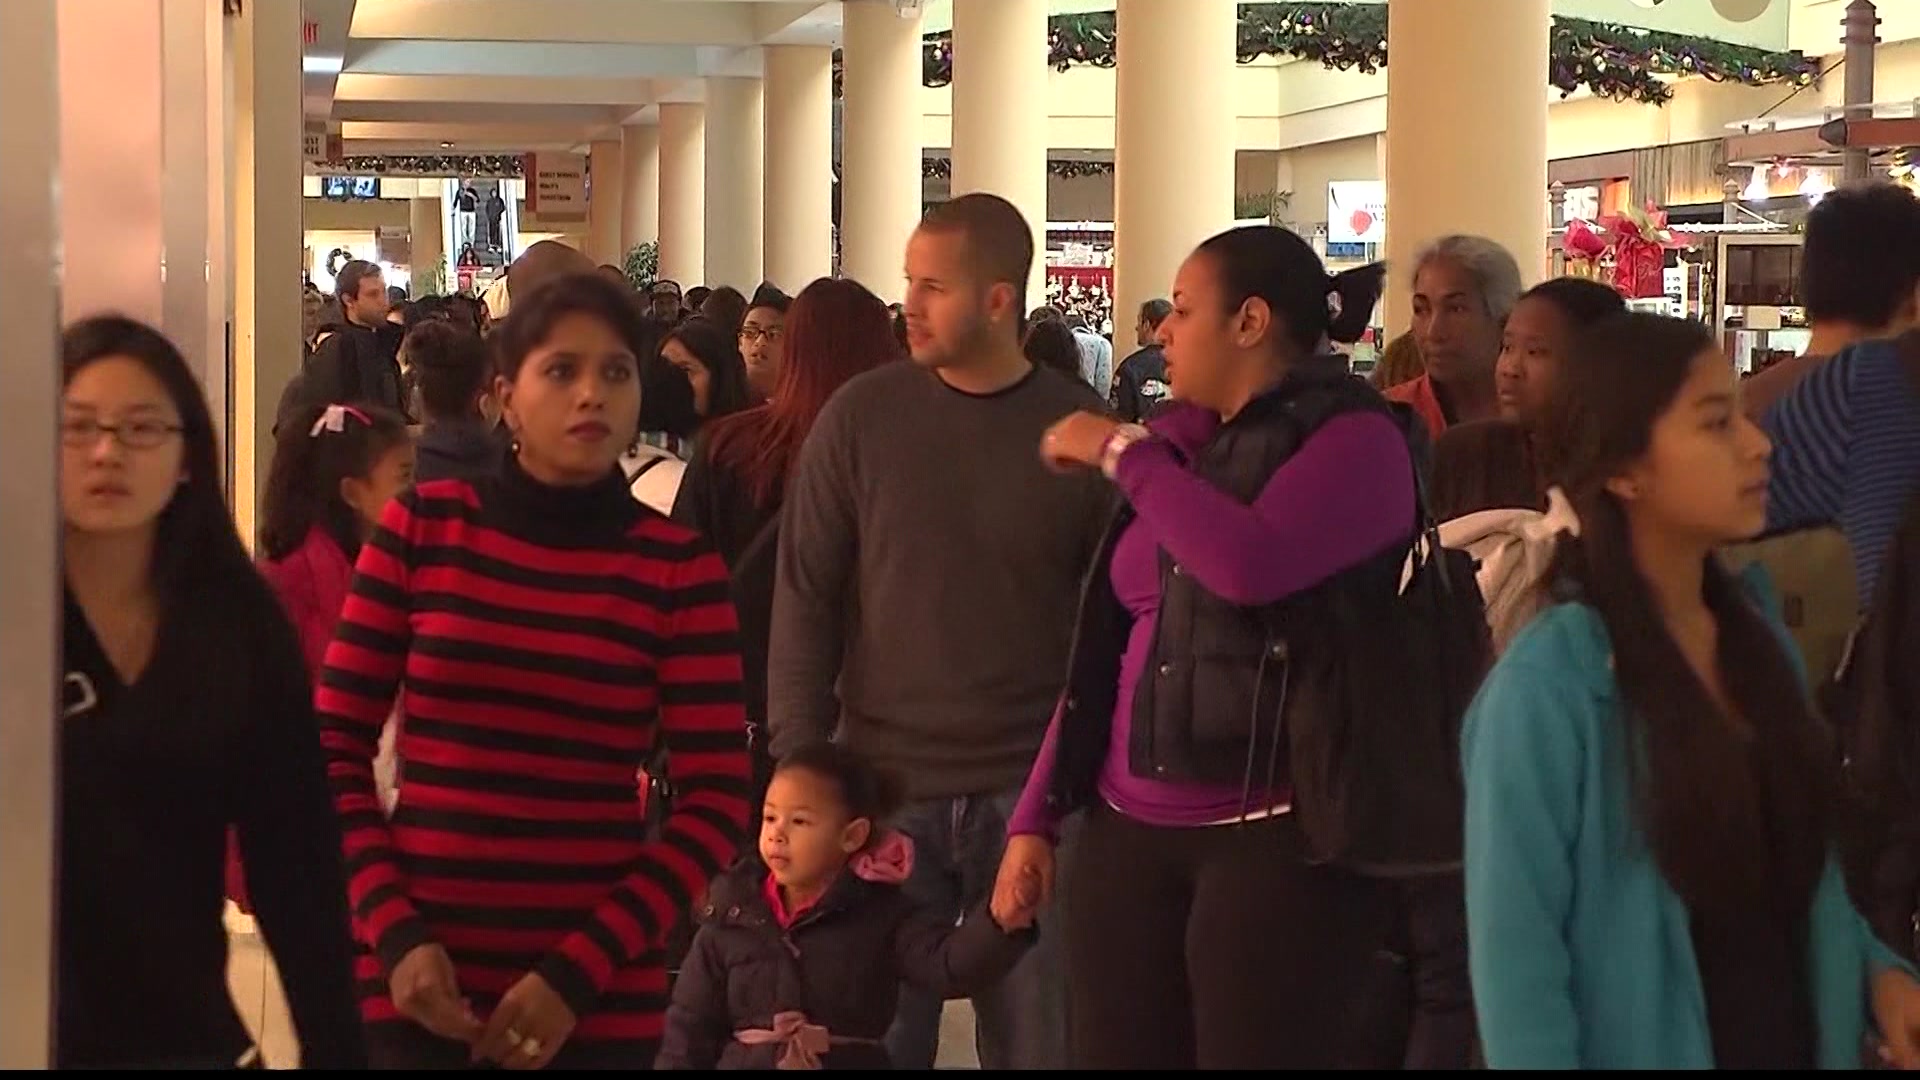 Retail experts predict crowded in-person shopping for Black Friday - News 12 Bronx